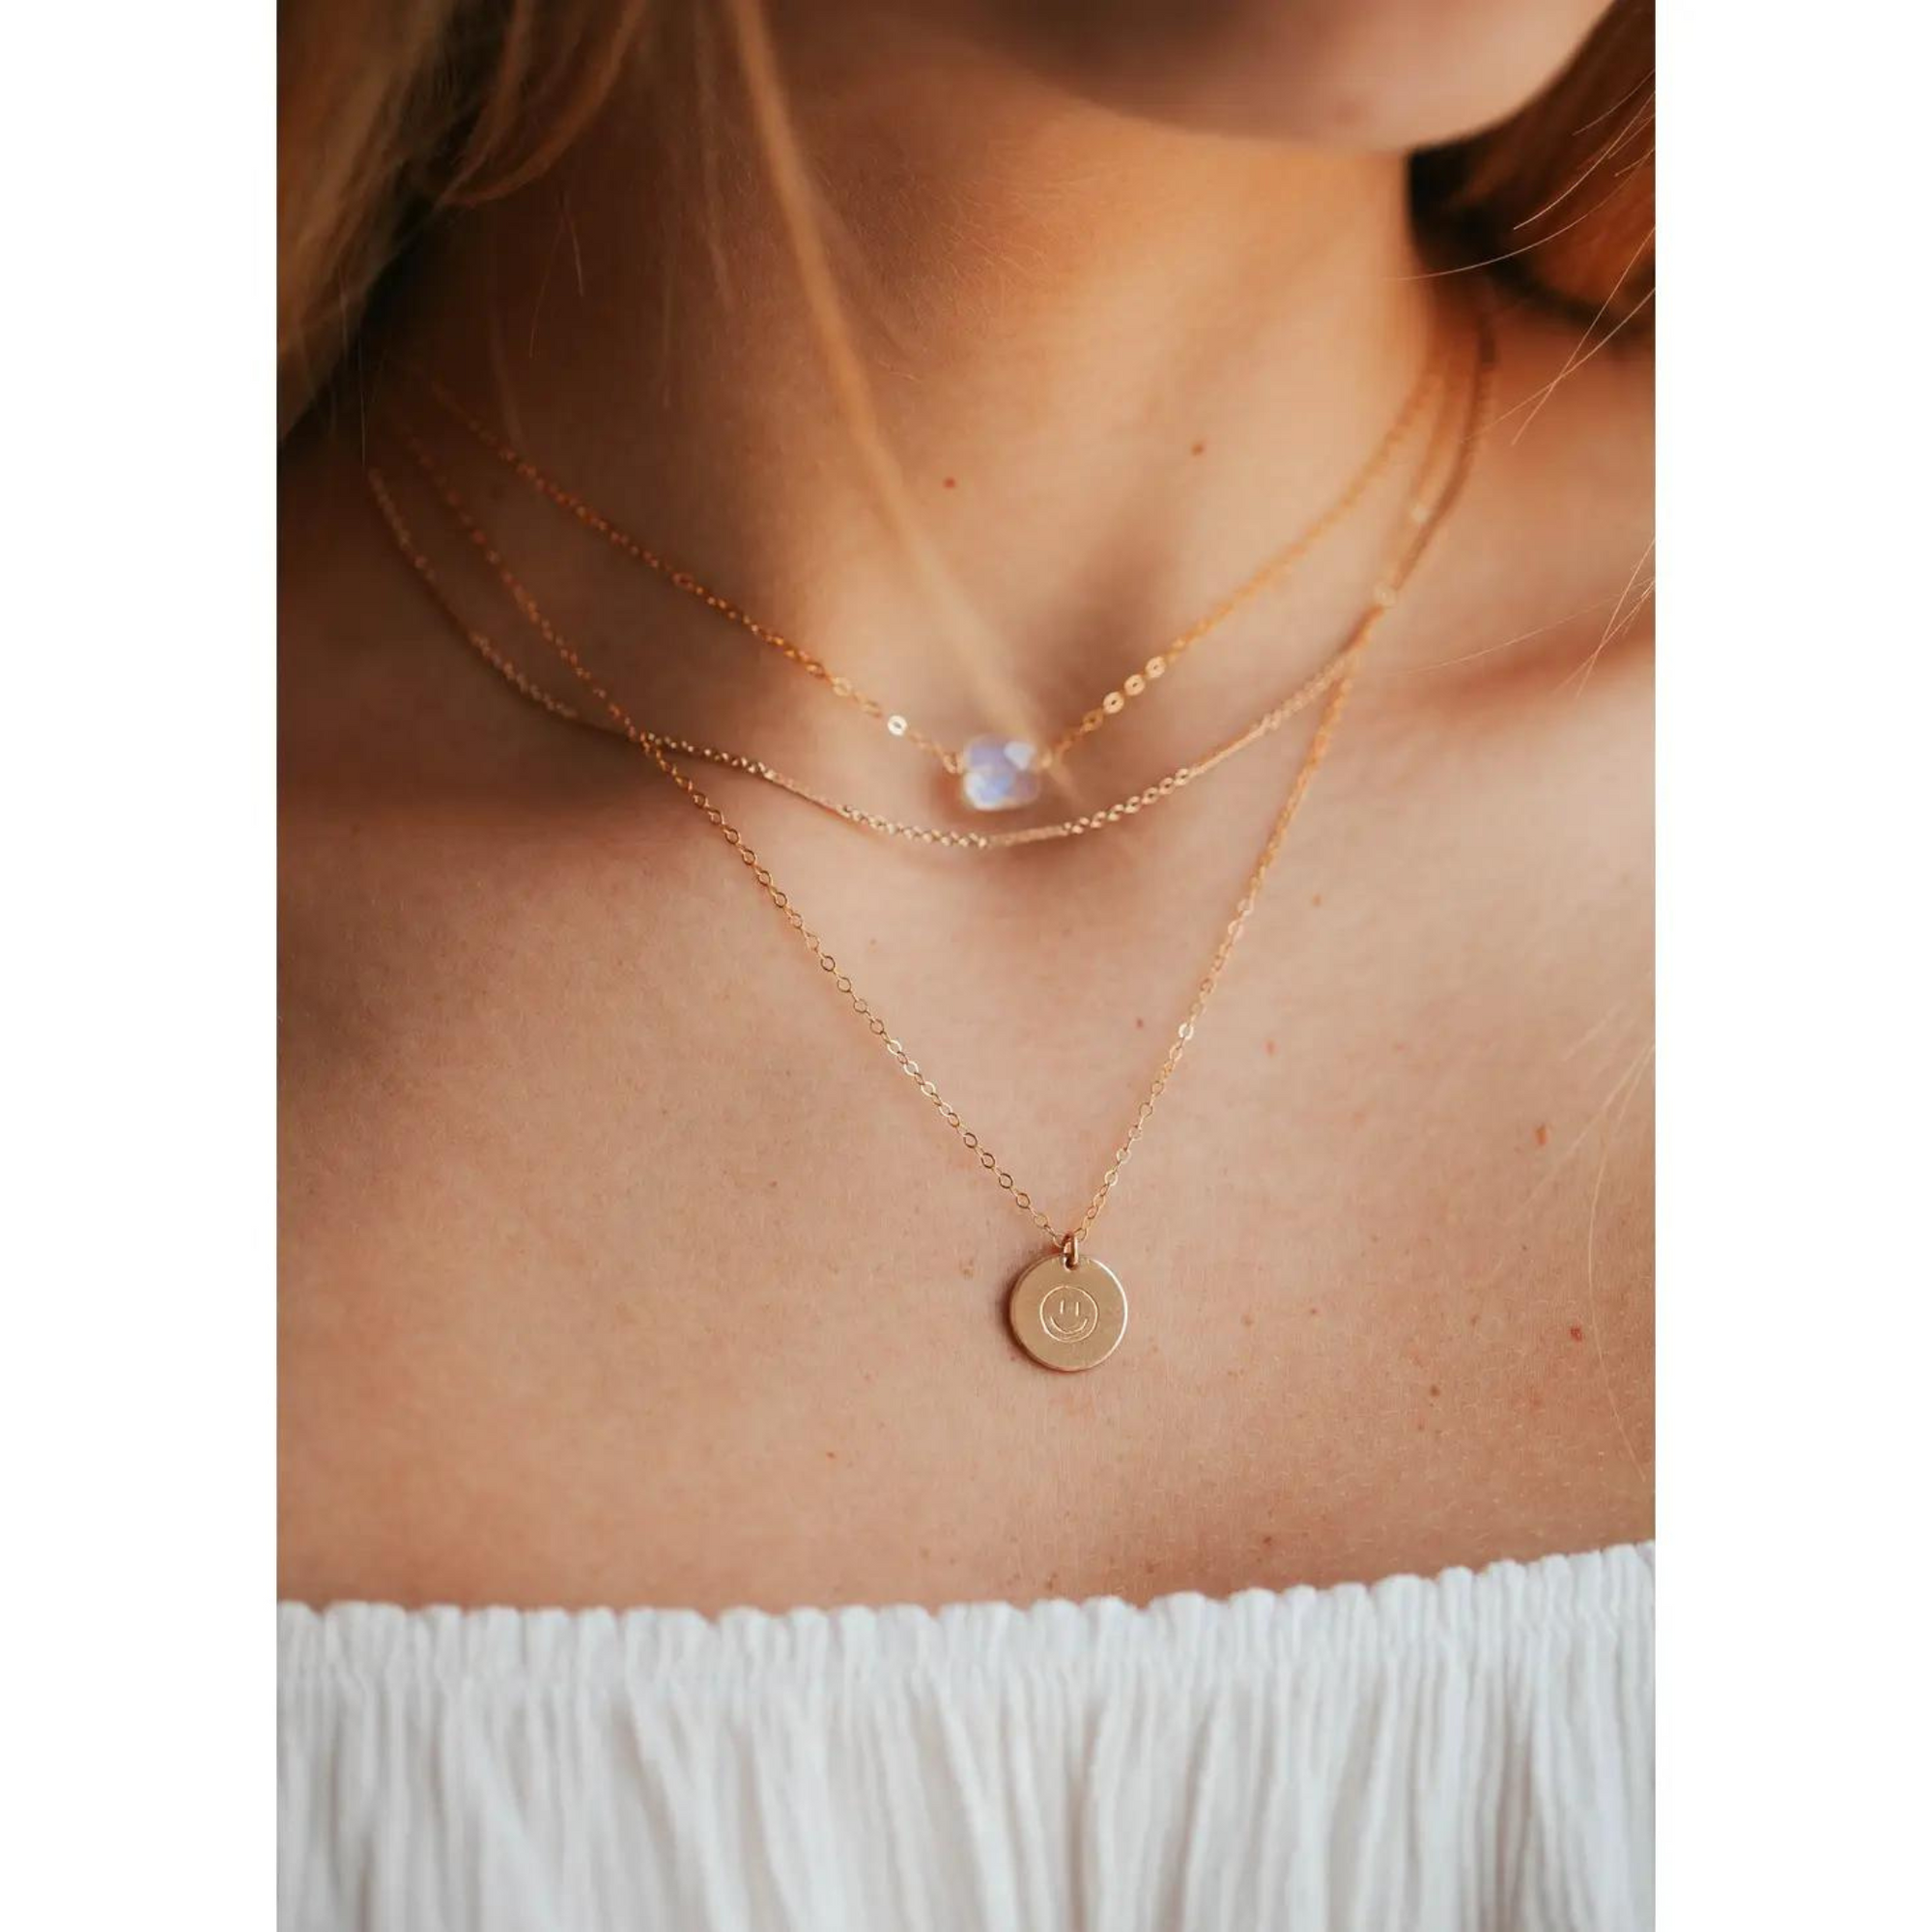 Moonstone Cushion Necklace | 14kt Gold Fill